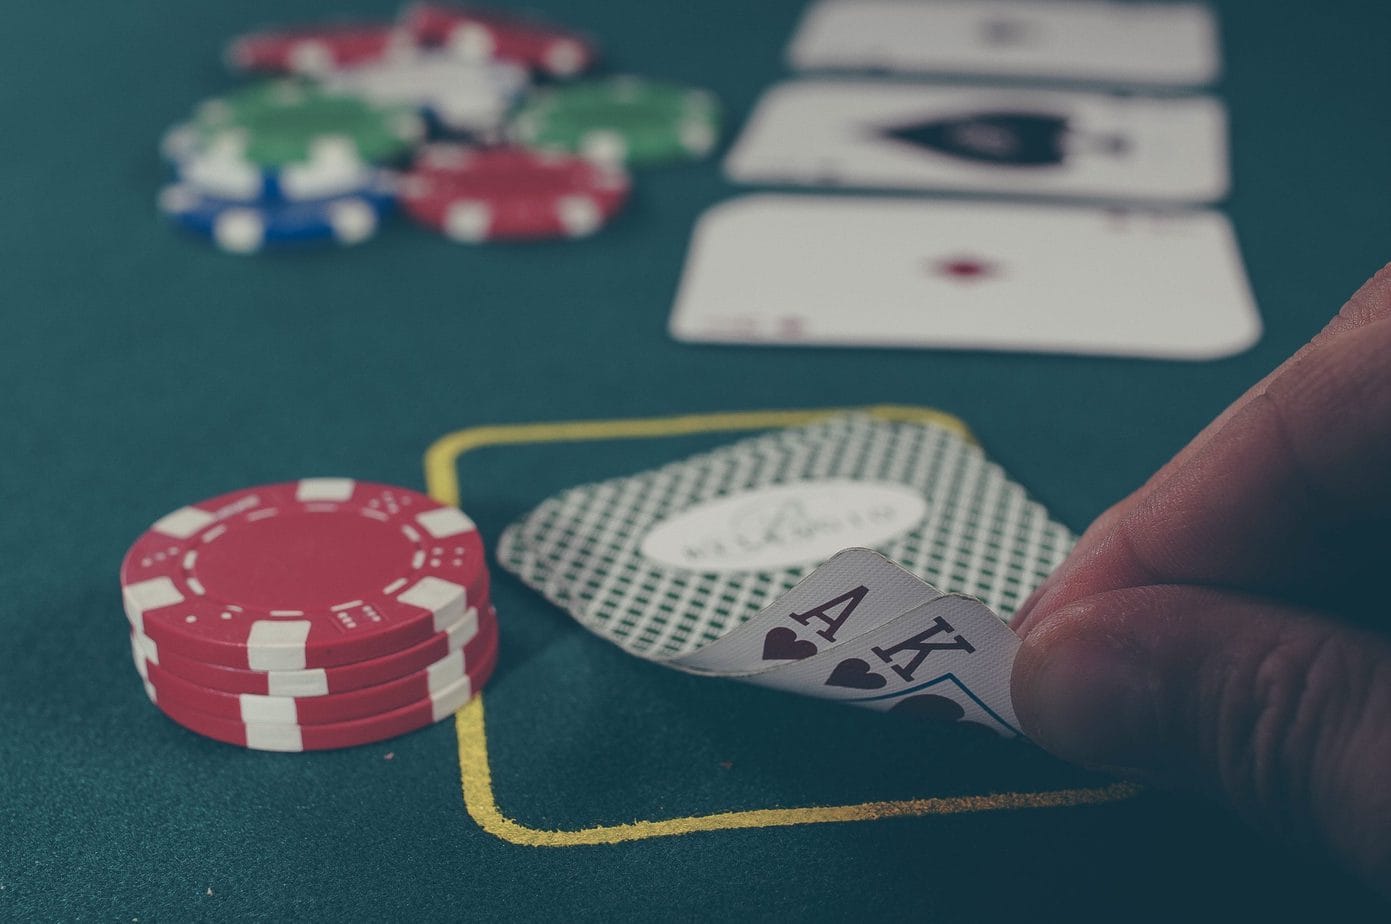 The ins and outs of a classy poker player